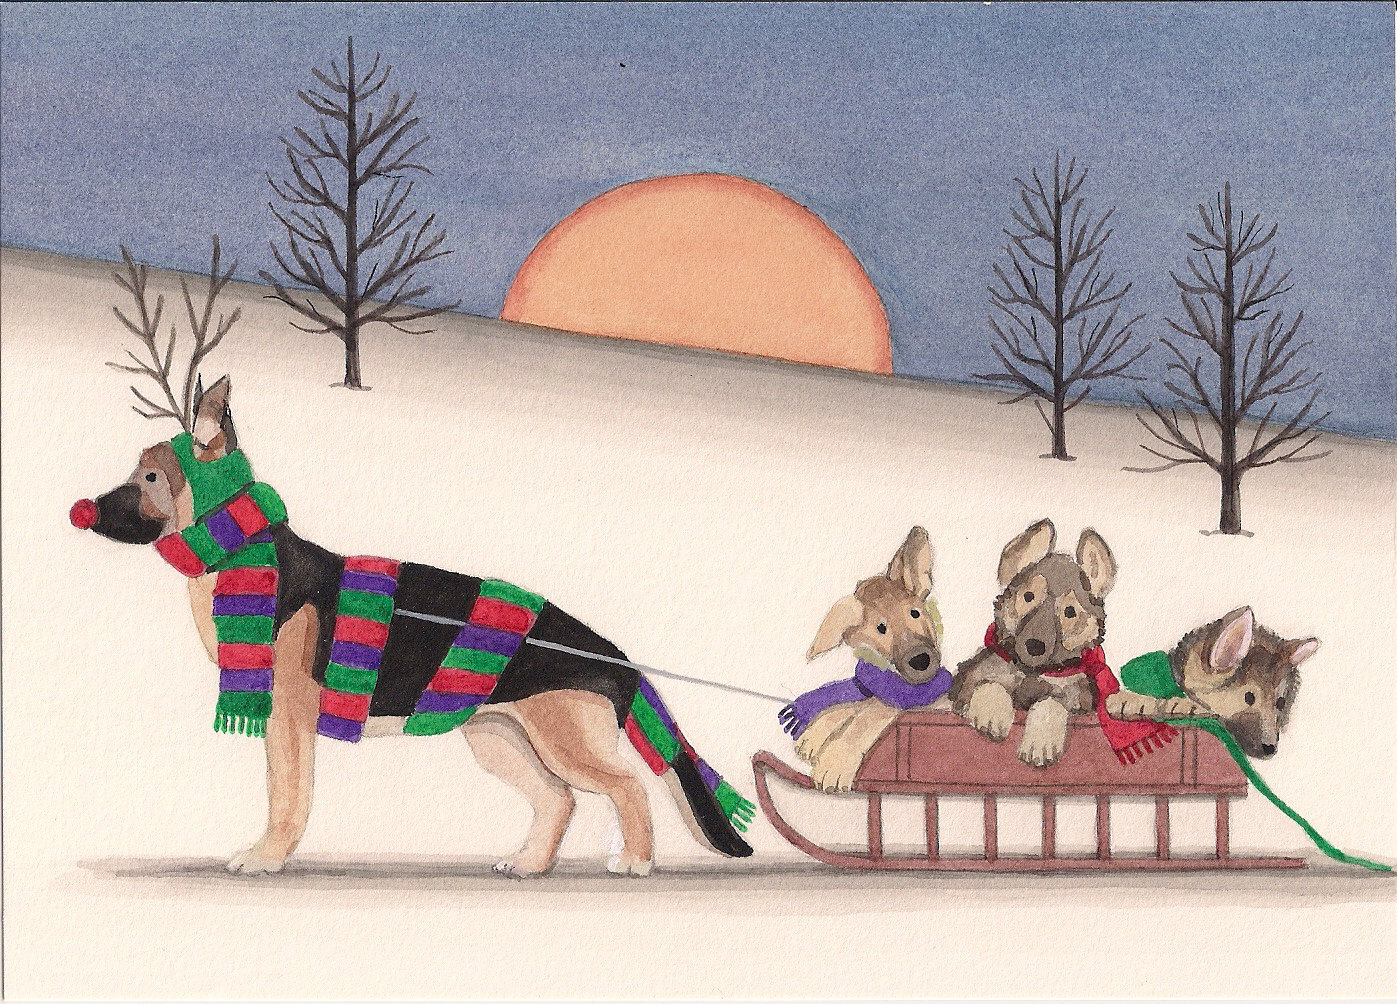 12 Christmas cards: German shepherd family goes for holiday